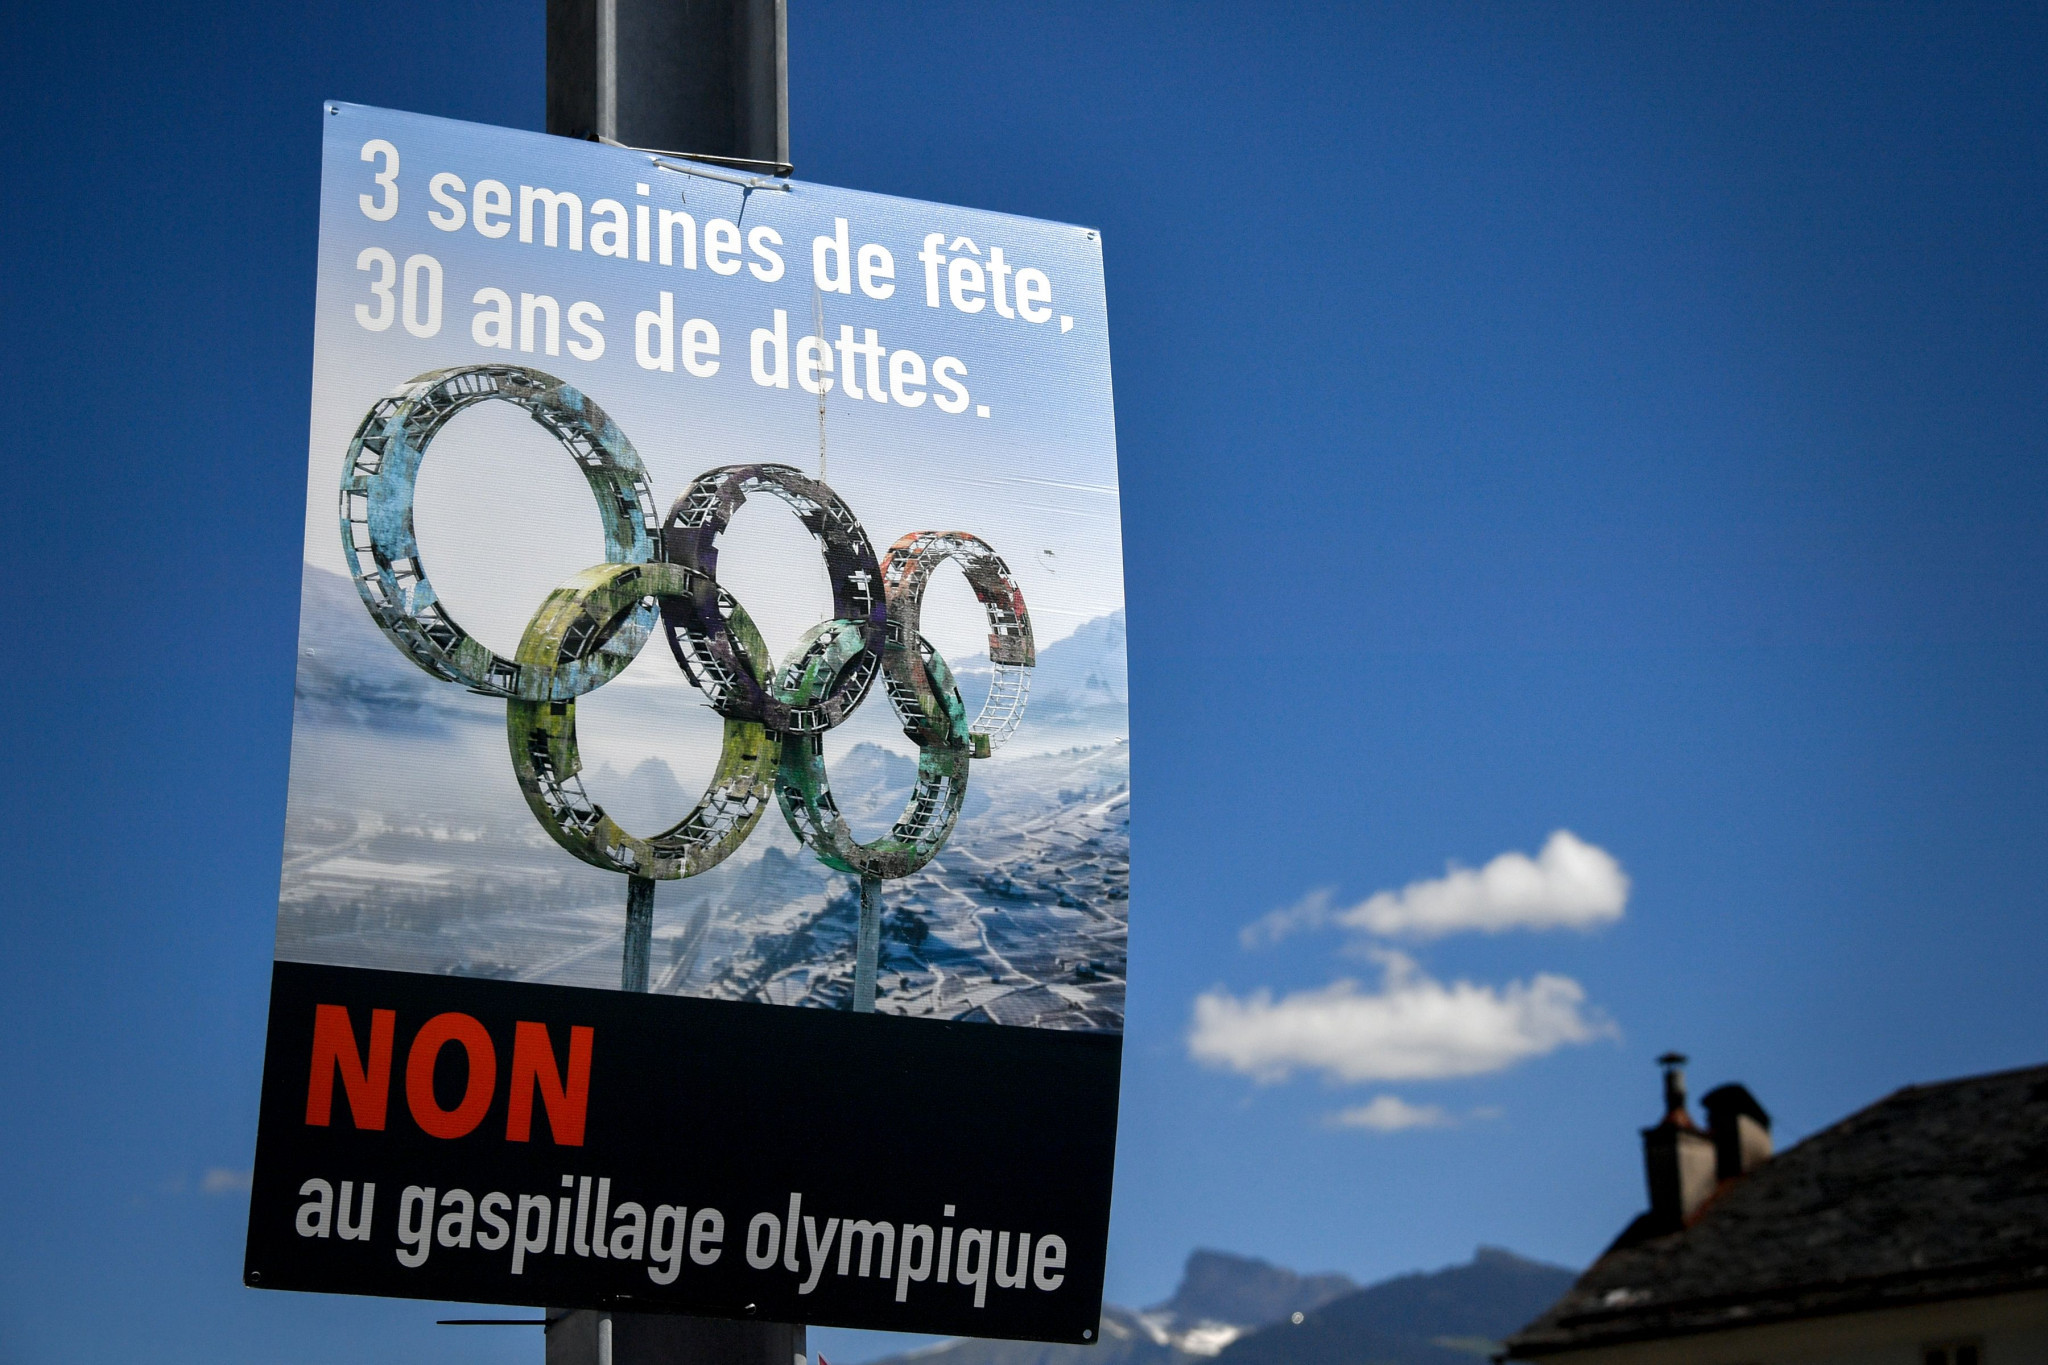 IOC urge cities to see positives of hosting Winter Olympics and Paralympics after Sion 2026 withdrawal